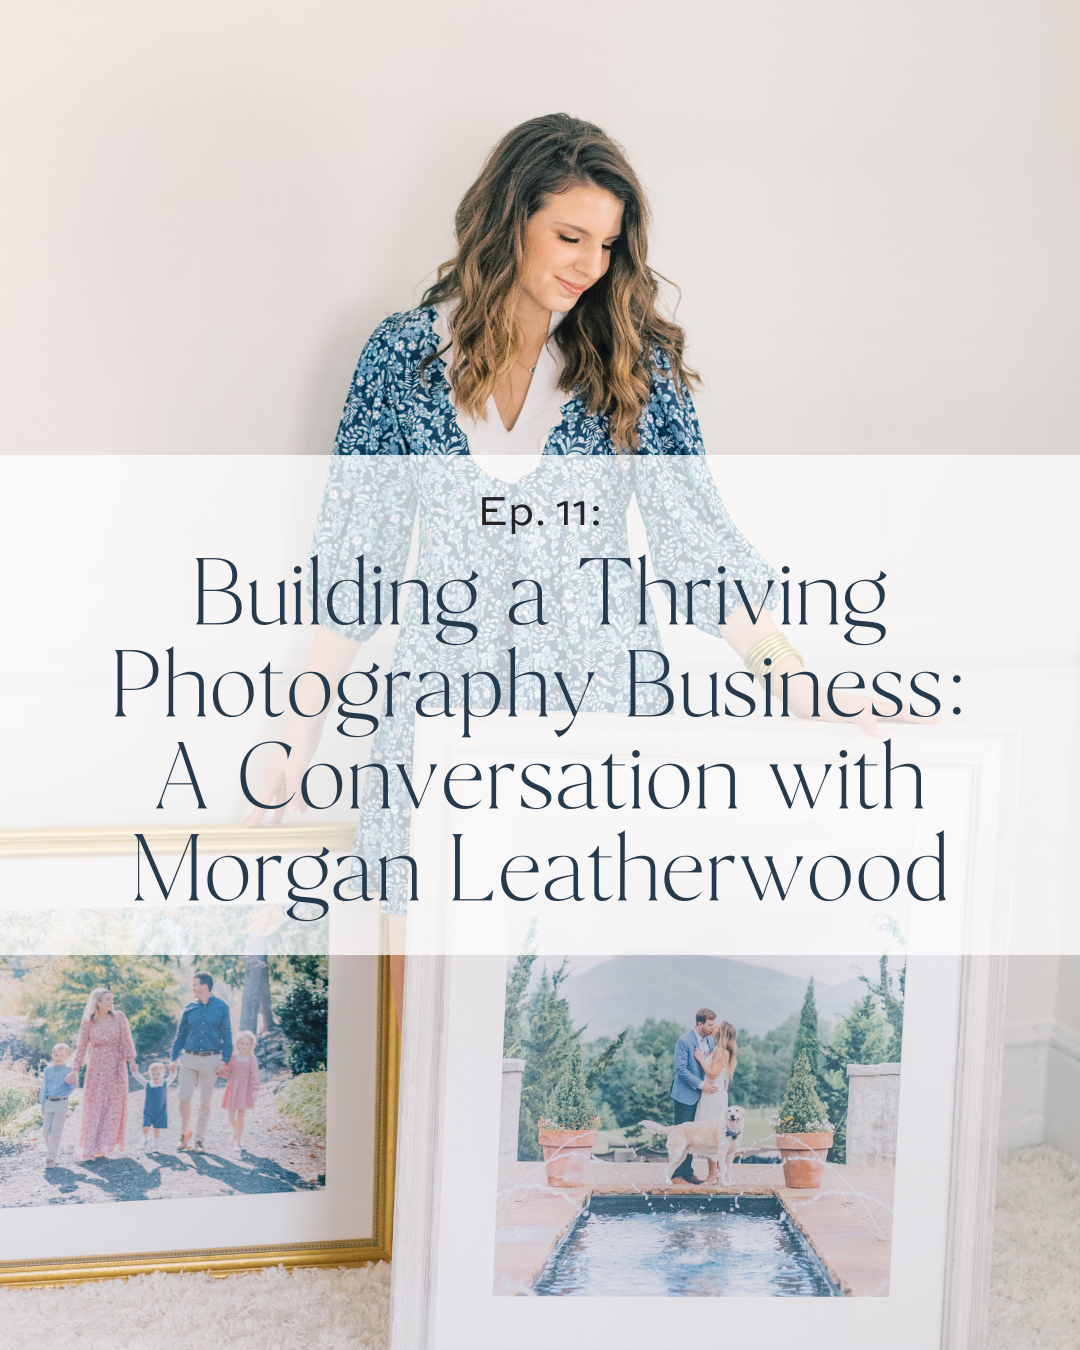 Building a Thriving Photography Business: A Conversation with Morgan Leatherwood